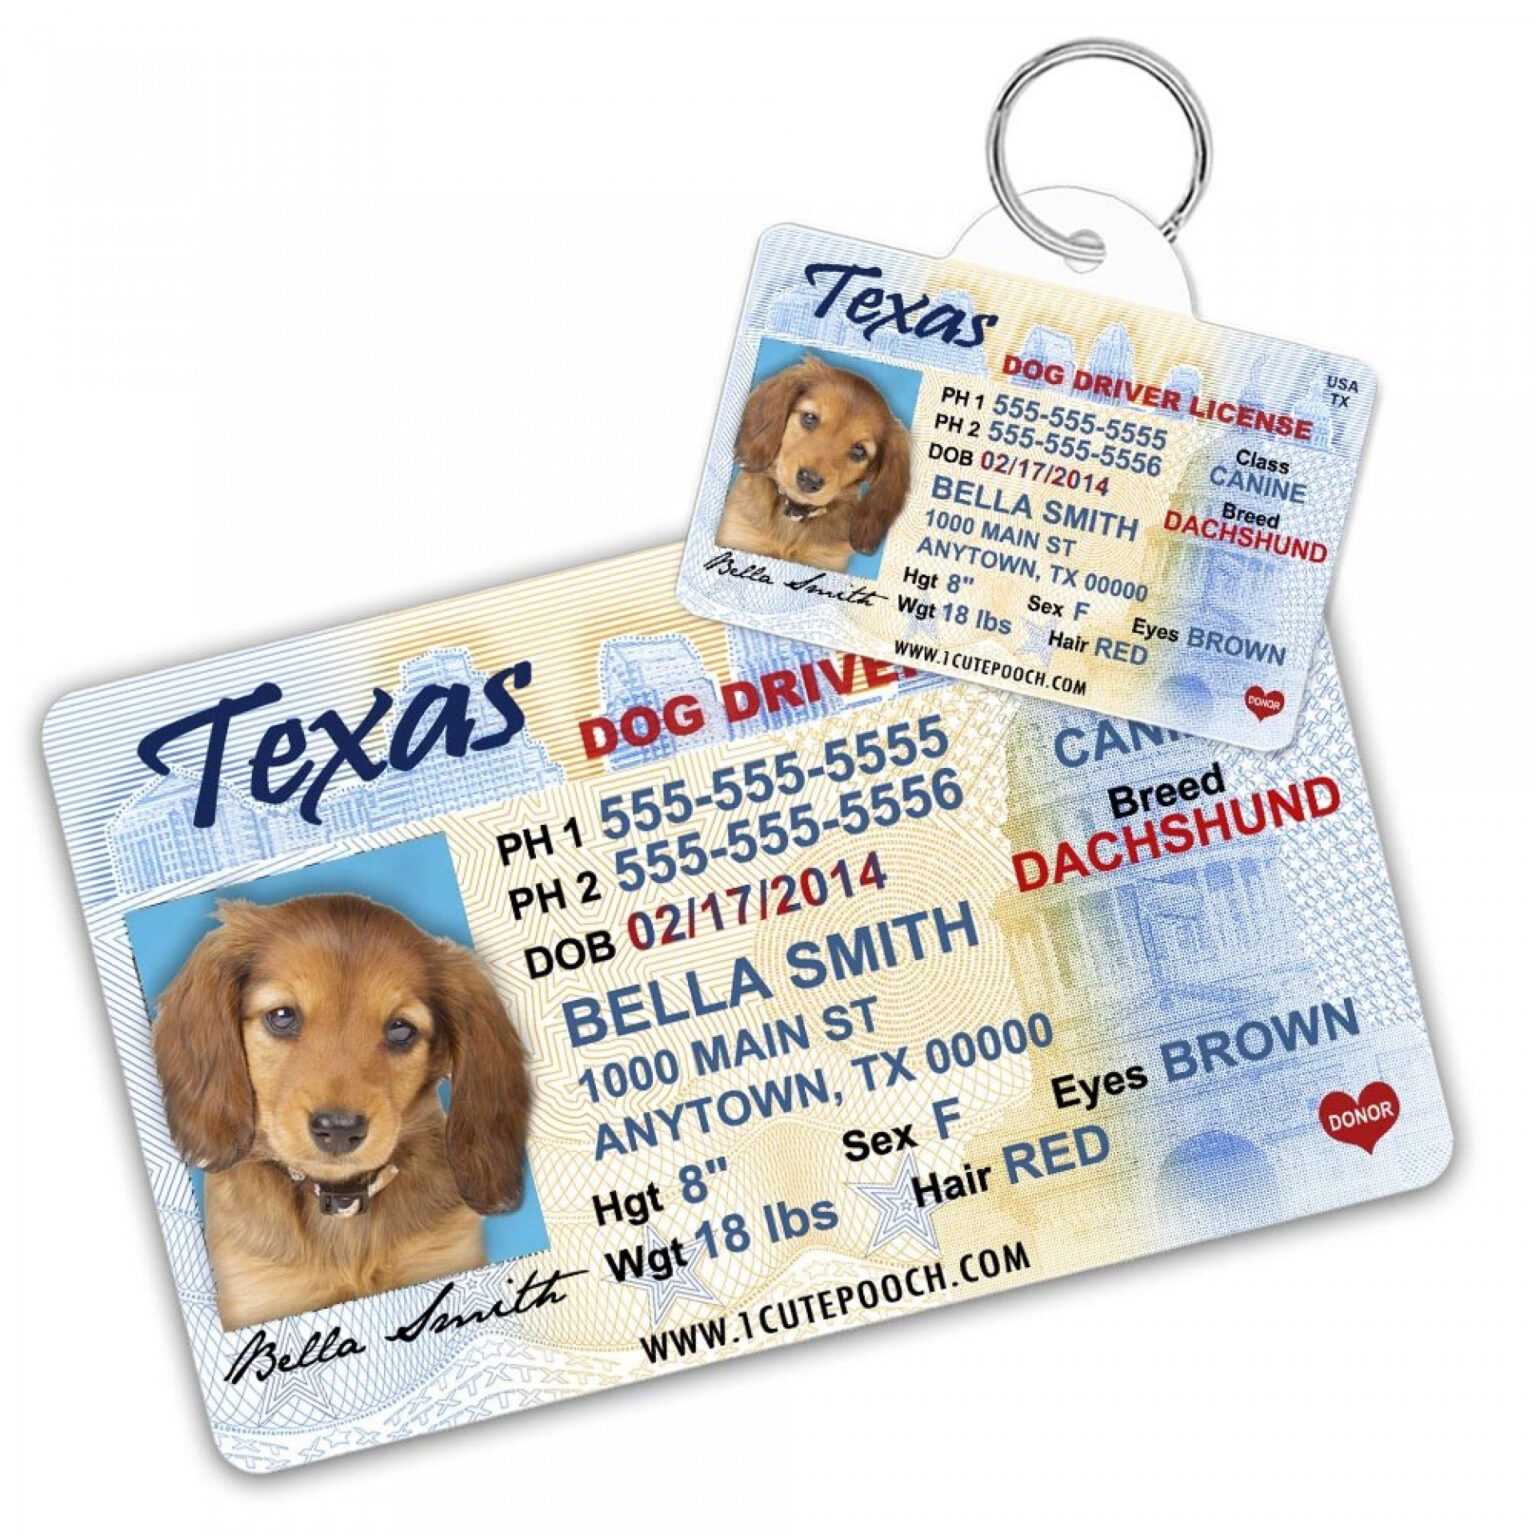 dating someone under 18 texas id card